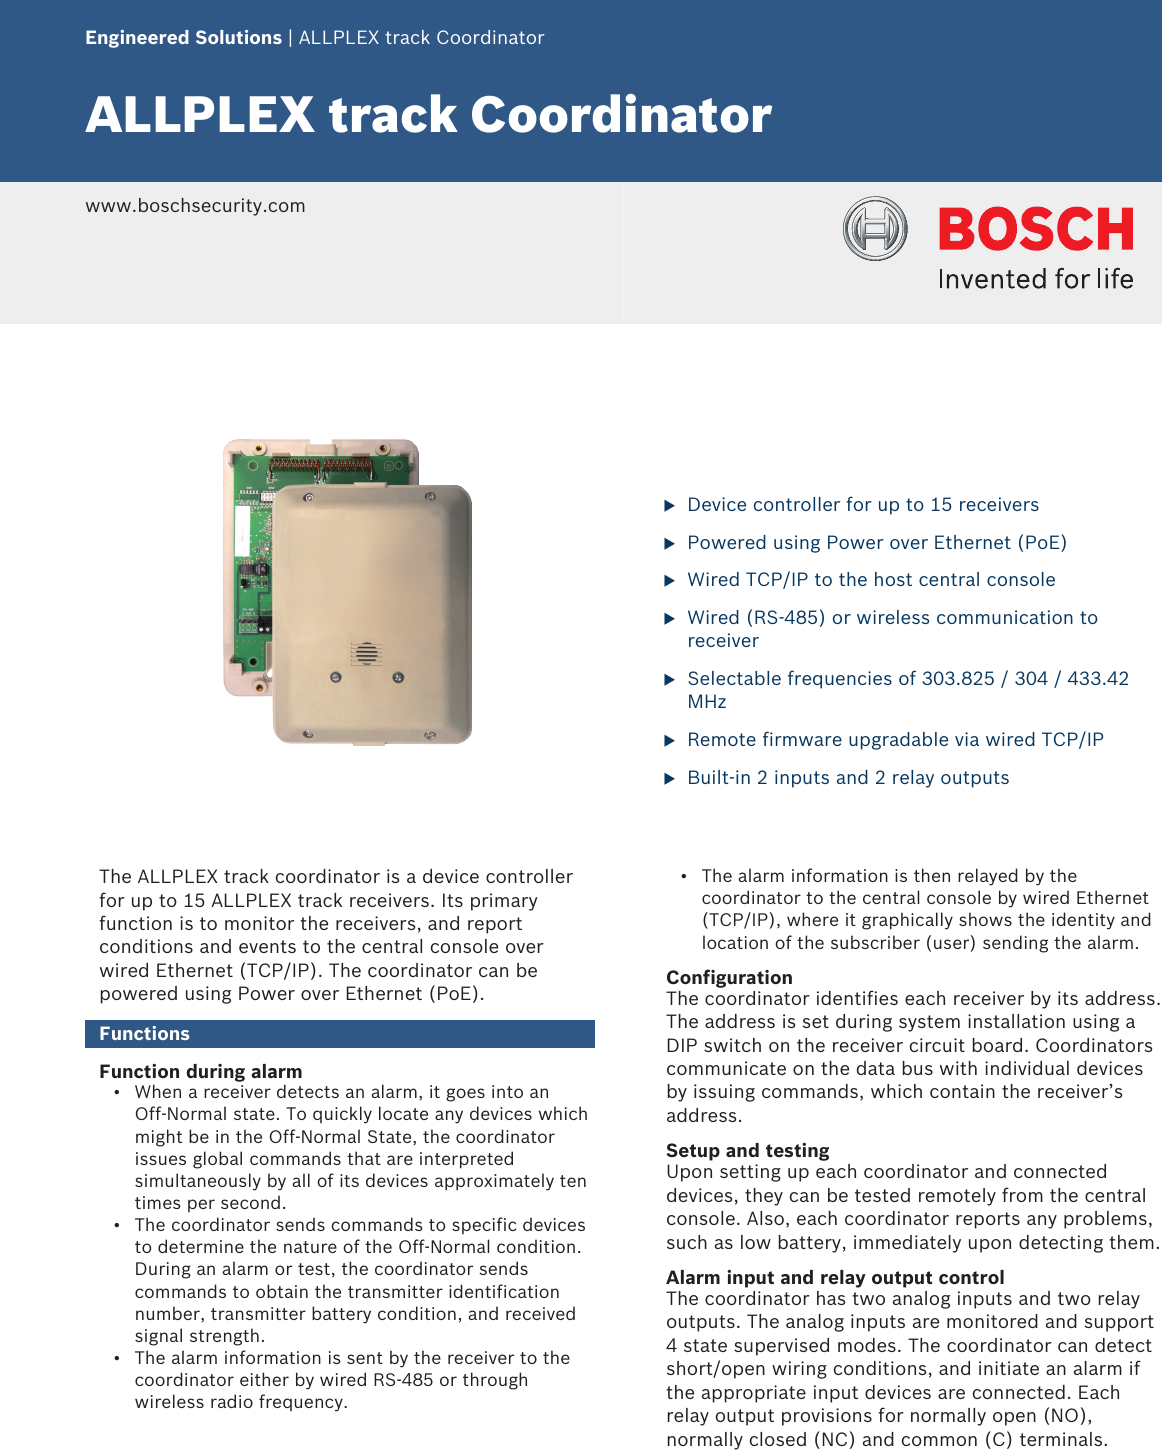  Engineered Solutions | ALLPLEX track CoordinatorALLPLEX track Coordinator www.boschsecurity.com             uDevice controller for up to 15 receiversuPowered using Power over Ethernet (PoE)uWired TCP/IP to the host central consoleuWired (RS-485) or wireless communication toreceiveruSelectable frequencies of 303.825 / 304 / 433.42MHzuRemote firmware upgradable via wired TCP/IPuBuilt-in 2 inputs and 2 relay outputsThe ALLPLEX track coordinator is a device controllerfor up to 15 ALLPLEX track receivers. Its primaryfunction is to monitor the receivers, and reportconditions and events to the central console overwired Ethernet (TCP/IP). The coordinator can bepowered using Power over Ethernet (PoE).FunctionsFunction during alarm• When a receiver detects an alarm, it goes into anOff‑Normal state. To quickly locate any devices whichmight be in the Off‑Normal State, the coordinatorissues global commands that are interpretedsimultaneously by all of its devices approximately tentimes per second.• The coordinator sends commands to specific devicesto determine the nature of the Off‑Normal condition.During an alarm or test, the coordinator sendscommands to obtain the transmitter identificationnumber, transmitter battery condition, and receivedsignal strength.• The alarm information is sent by the receiver to thecoordinator either by wired RS-485 or throughwireless radio frequency.• The alarm information is then relayed by thecoordinator to the central console by wired Ethernet(TCP/IP), where it graphically shows the identity andlocation of the subscriber (user) sending the alarm.ConfigurationThe coordinator identifies each receiver by its address.The address is set during system installation using aDIP switch on the receiver circuit board. Coordinatorscommunicate on the data bus with individual devicesby issuing commands, which contain the receiver’saddress.Setup and testingUpon setting up each coordinator and connecteddevices, they can be tested remotely from the centralconsole. Also, each coordinator reports any problems,such as low battery, immediately upon detecting them.Alarm input and relay output controlThe coordinator has two analog inputs and two relayoutputs. The analog inputs are monitored and support4 state supervised modes. The coordinator can detectshort/open wiring conditions, and initiate an alarm ifthe appropriate input devices are connected. Eachrelay output provisions for normally open (NO),normally closed (NC) and common (C) terminals.